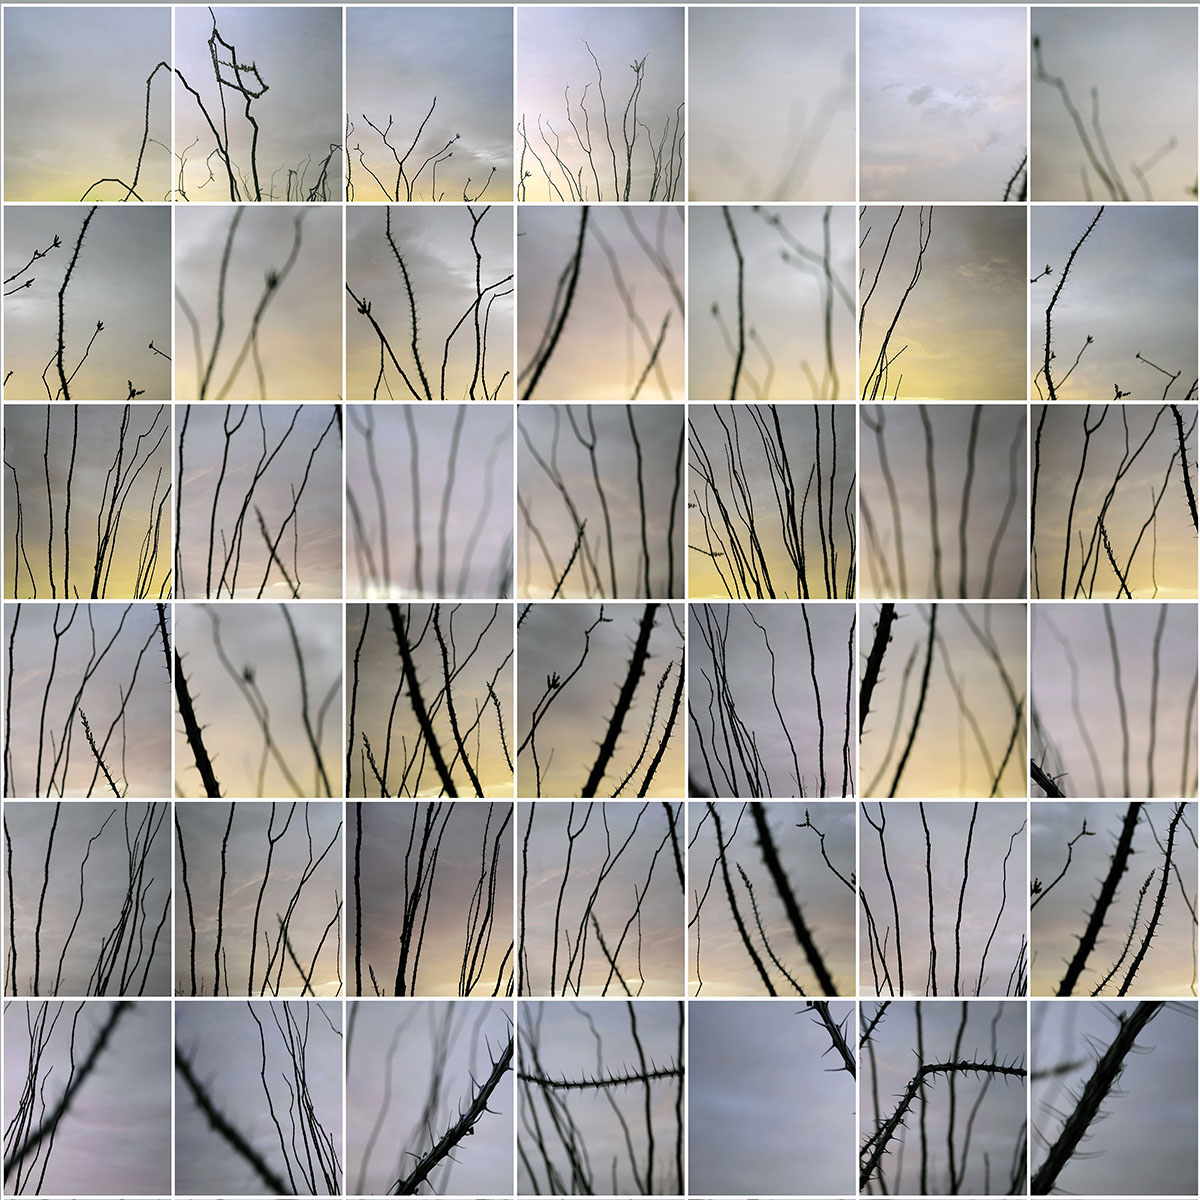 A collection of close-up images of desert ocotillo